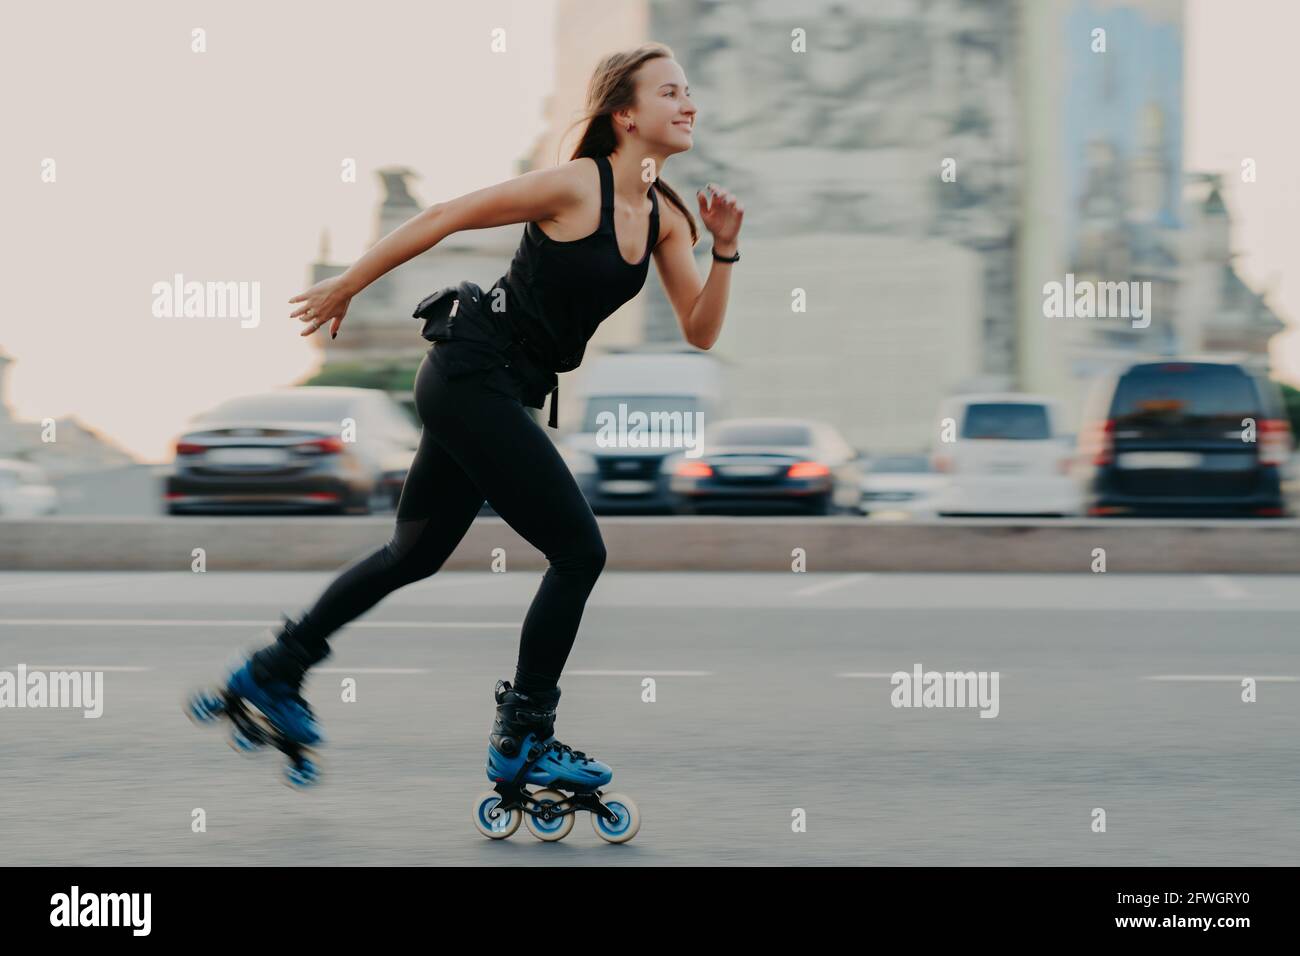 Slim healthy woman has recration time enjoys rolleblading on speed moves fast has cheerful expression wears black t shirt and leggings. Active rest Stock Photo